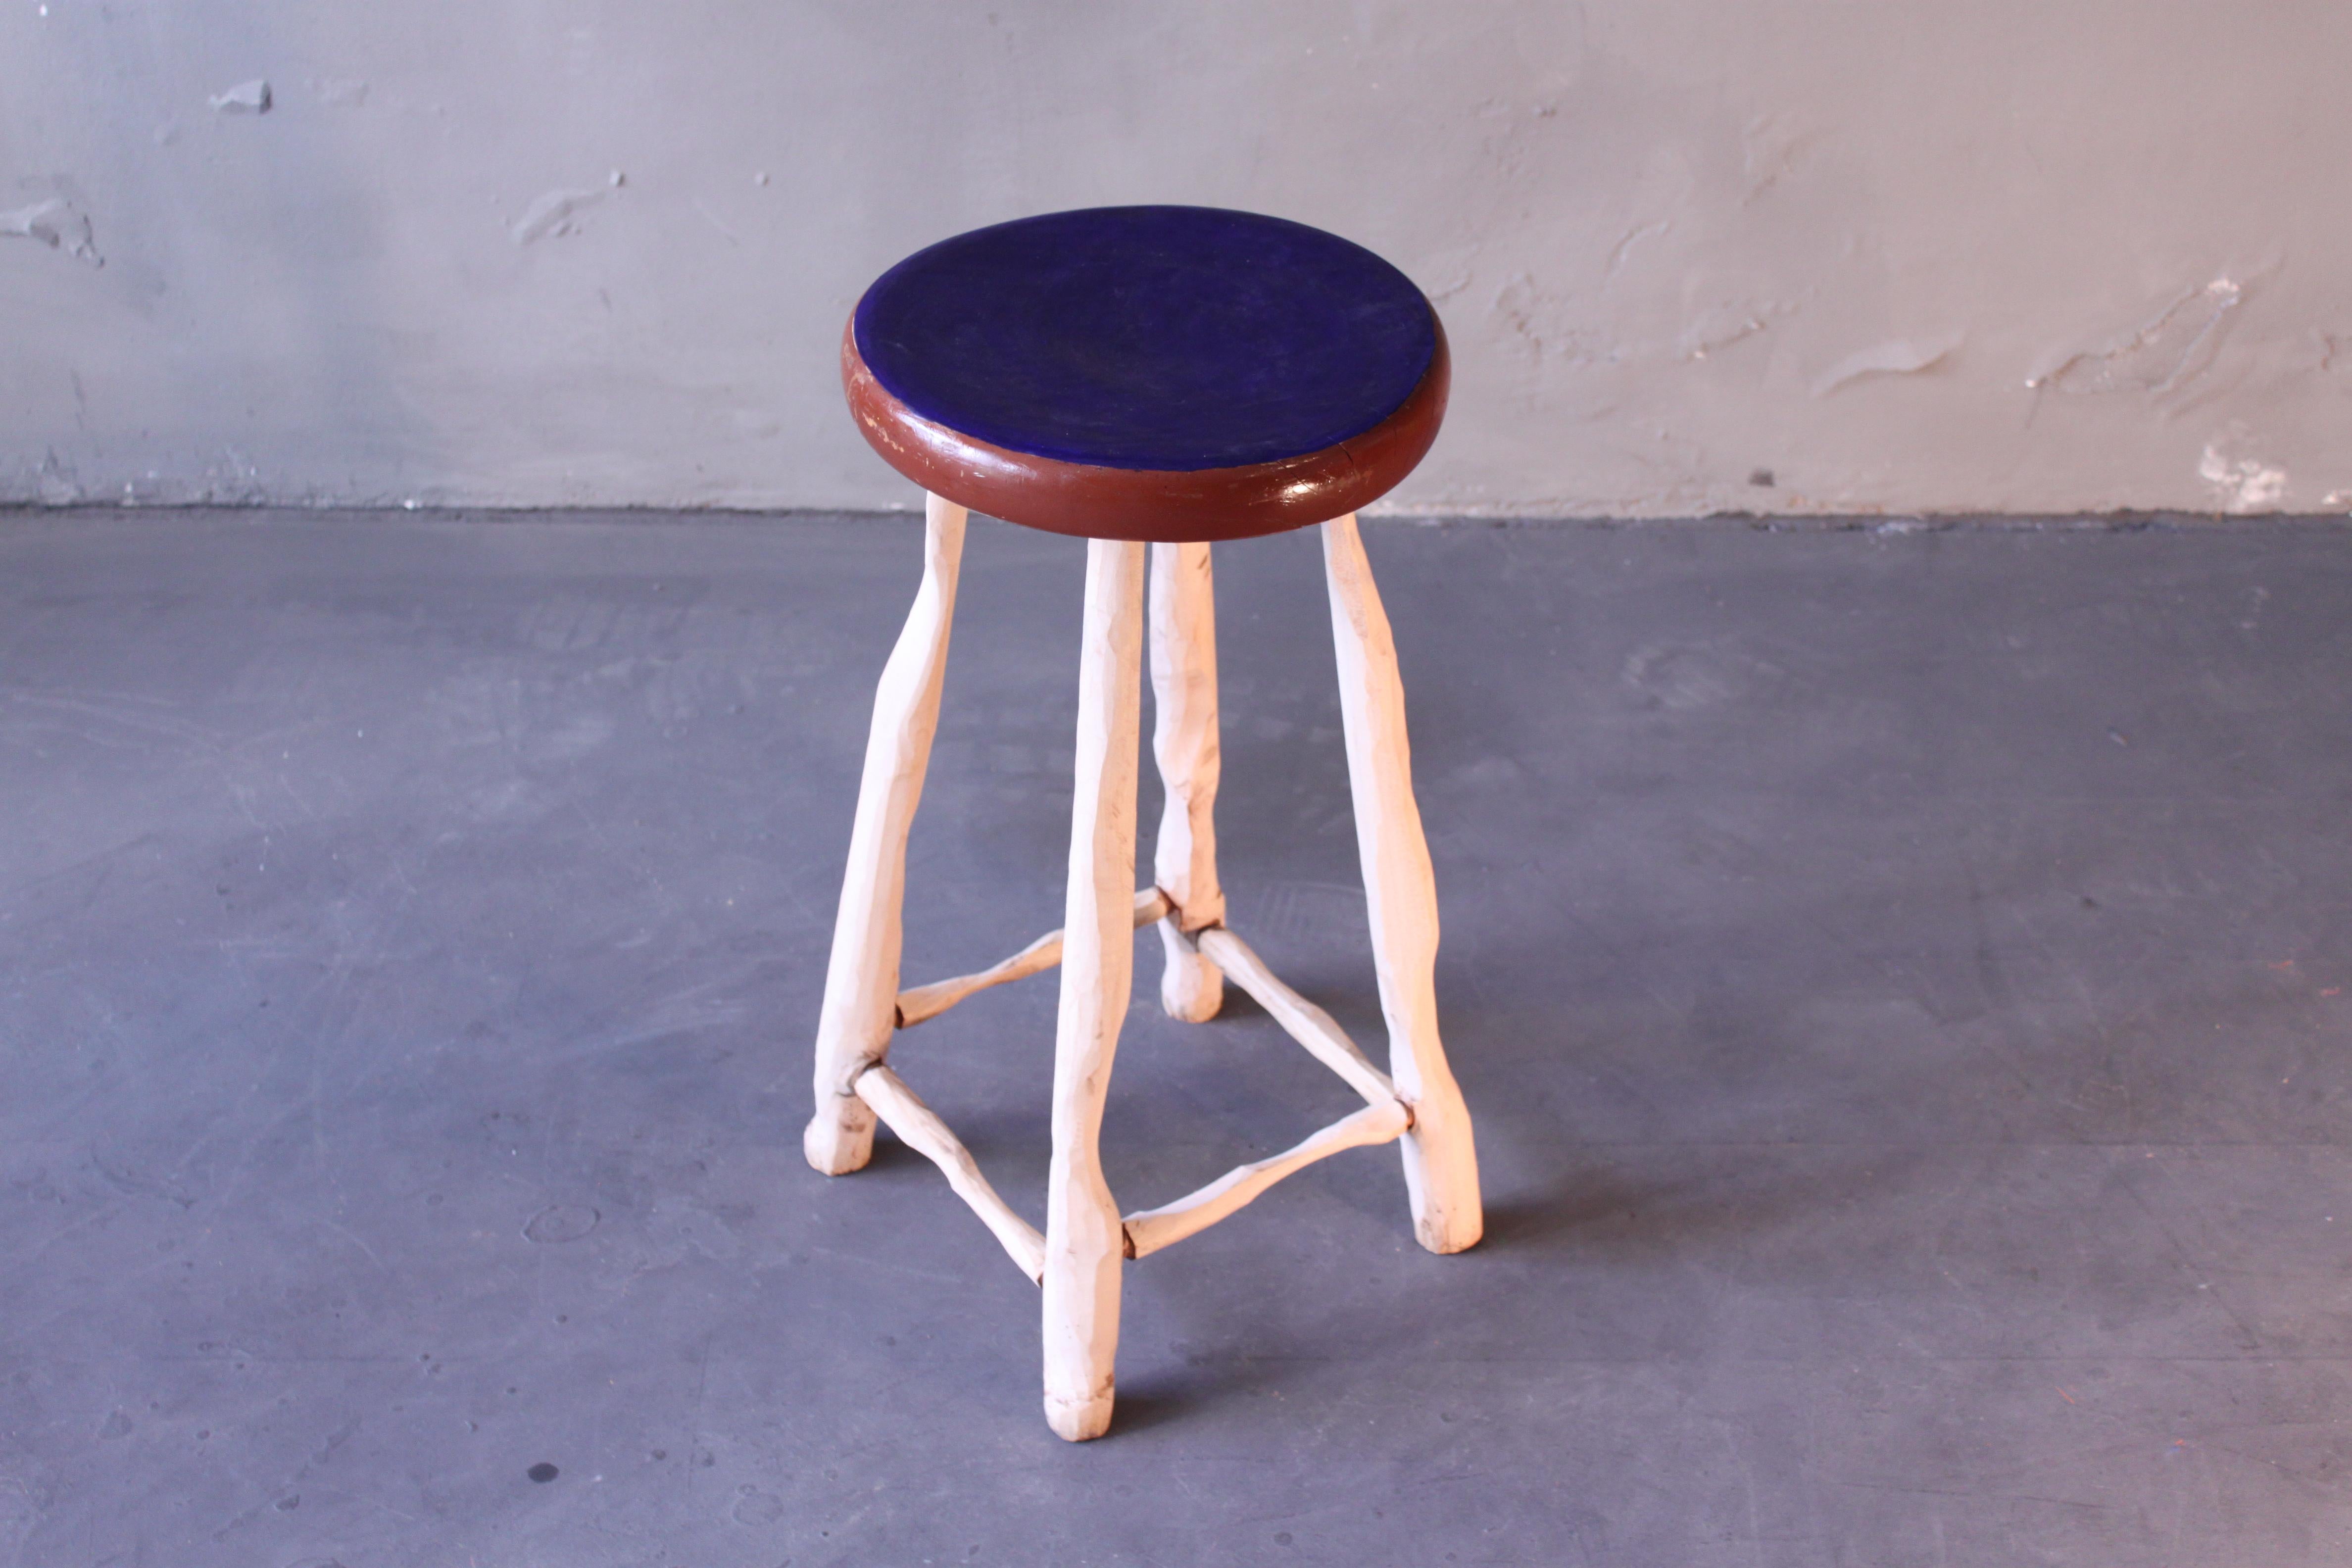 High stool, re-shaped and painted. This piece has turned from a typical 1930s work stool to a functional art piece.
 
• born 1964 in Aschaffenburg, Germany
• since 1986 active as a visual artist 
• since 1989 national and international